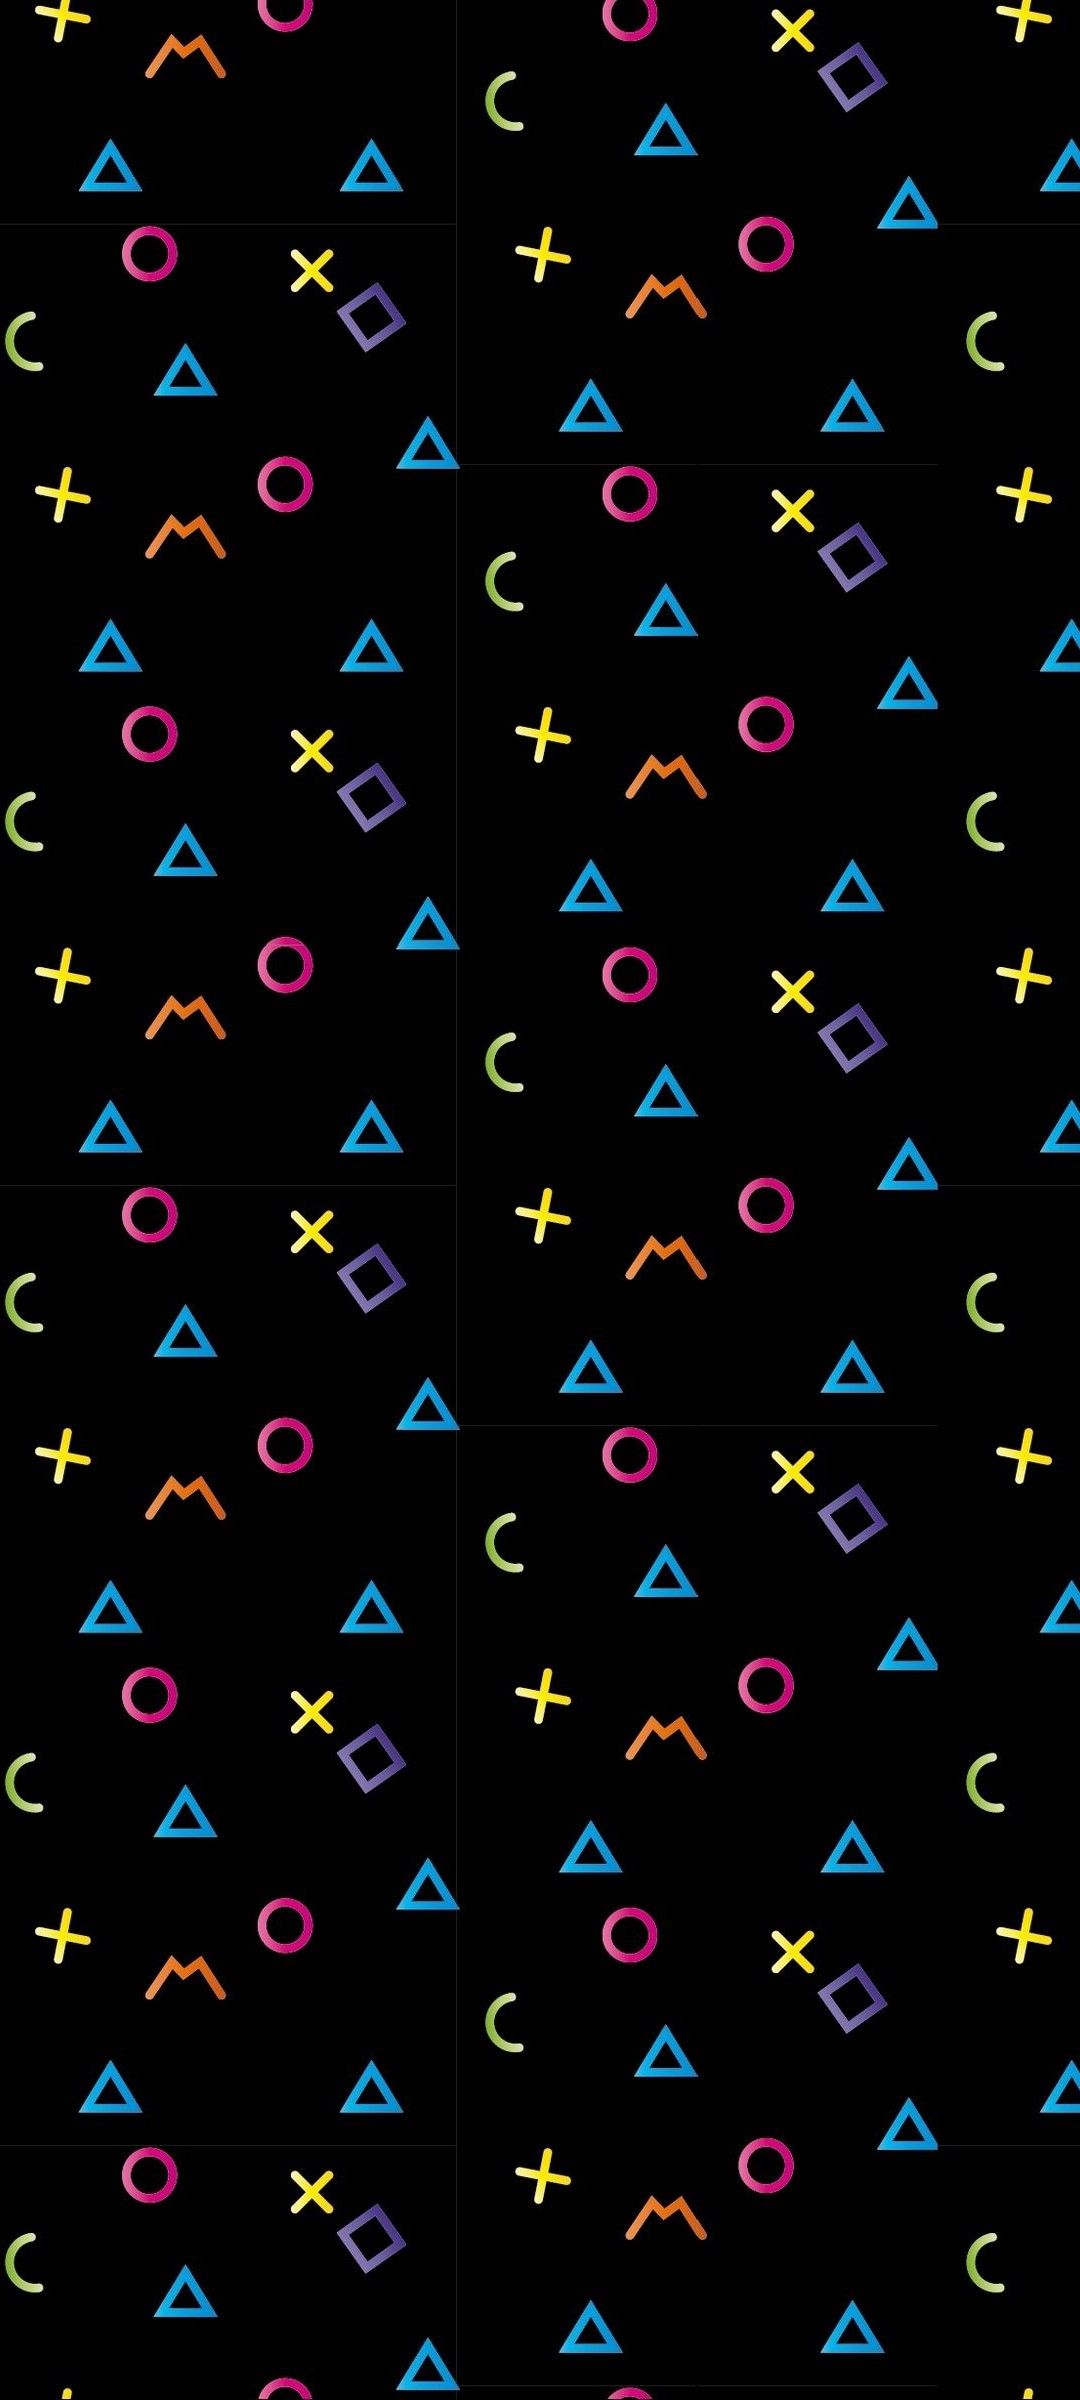 A pattern of different colored shapes on black - Math